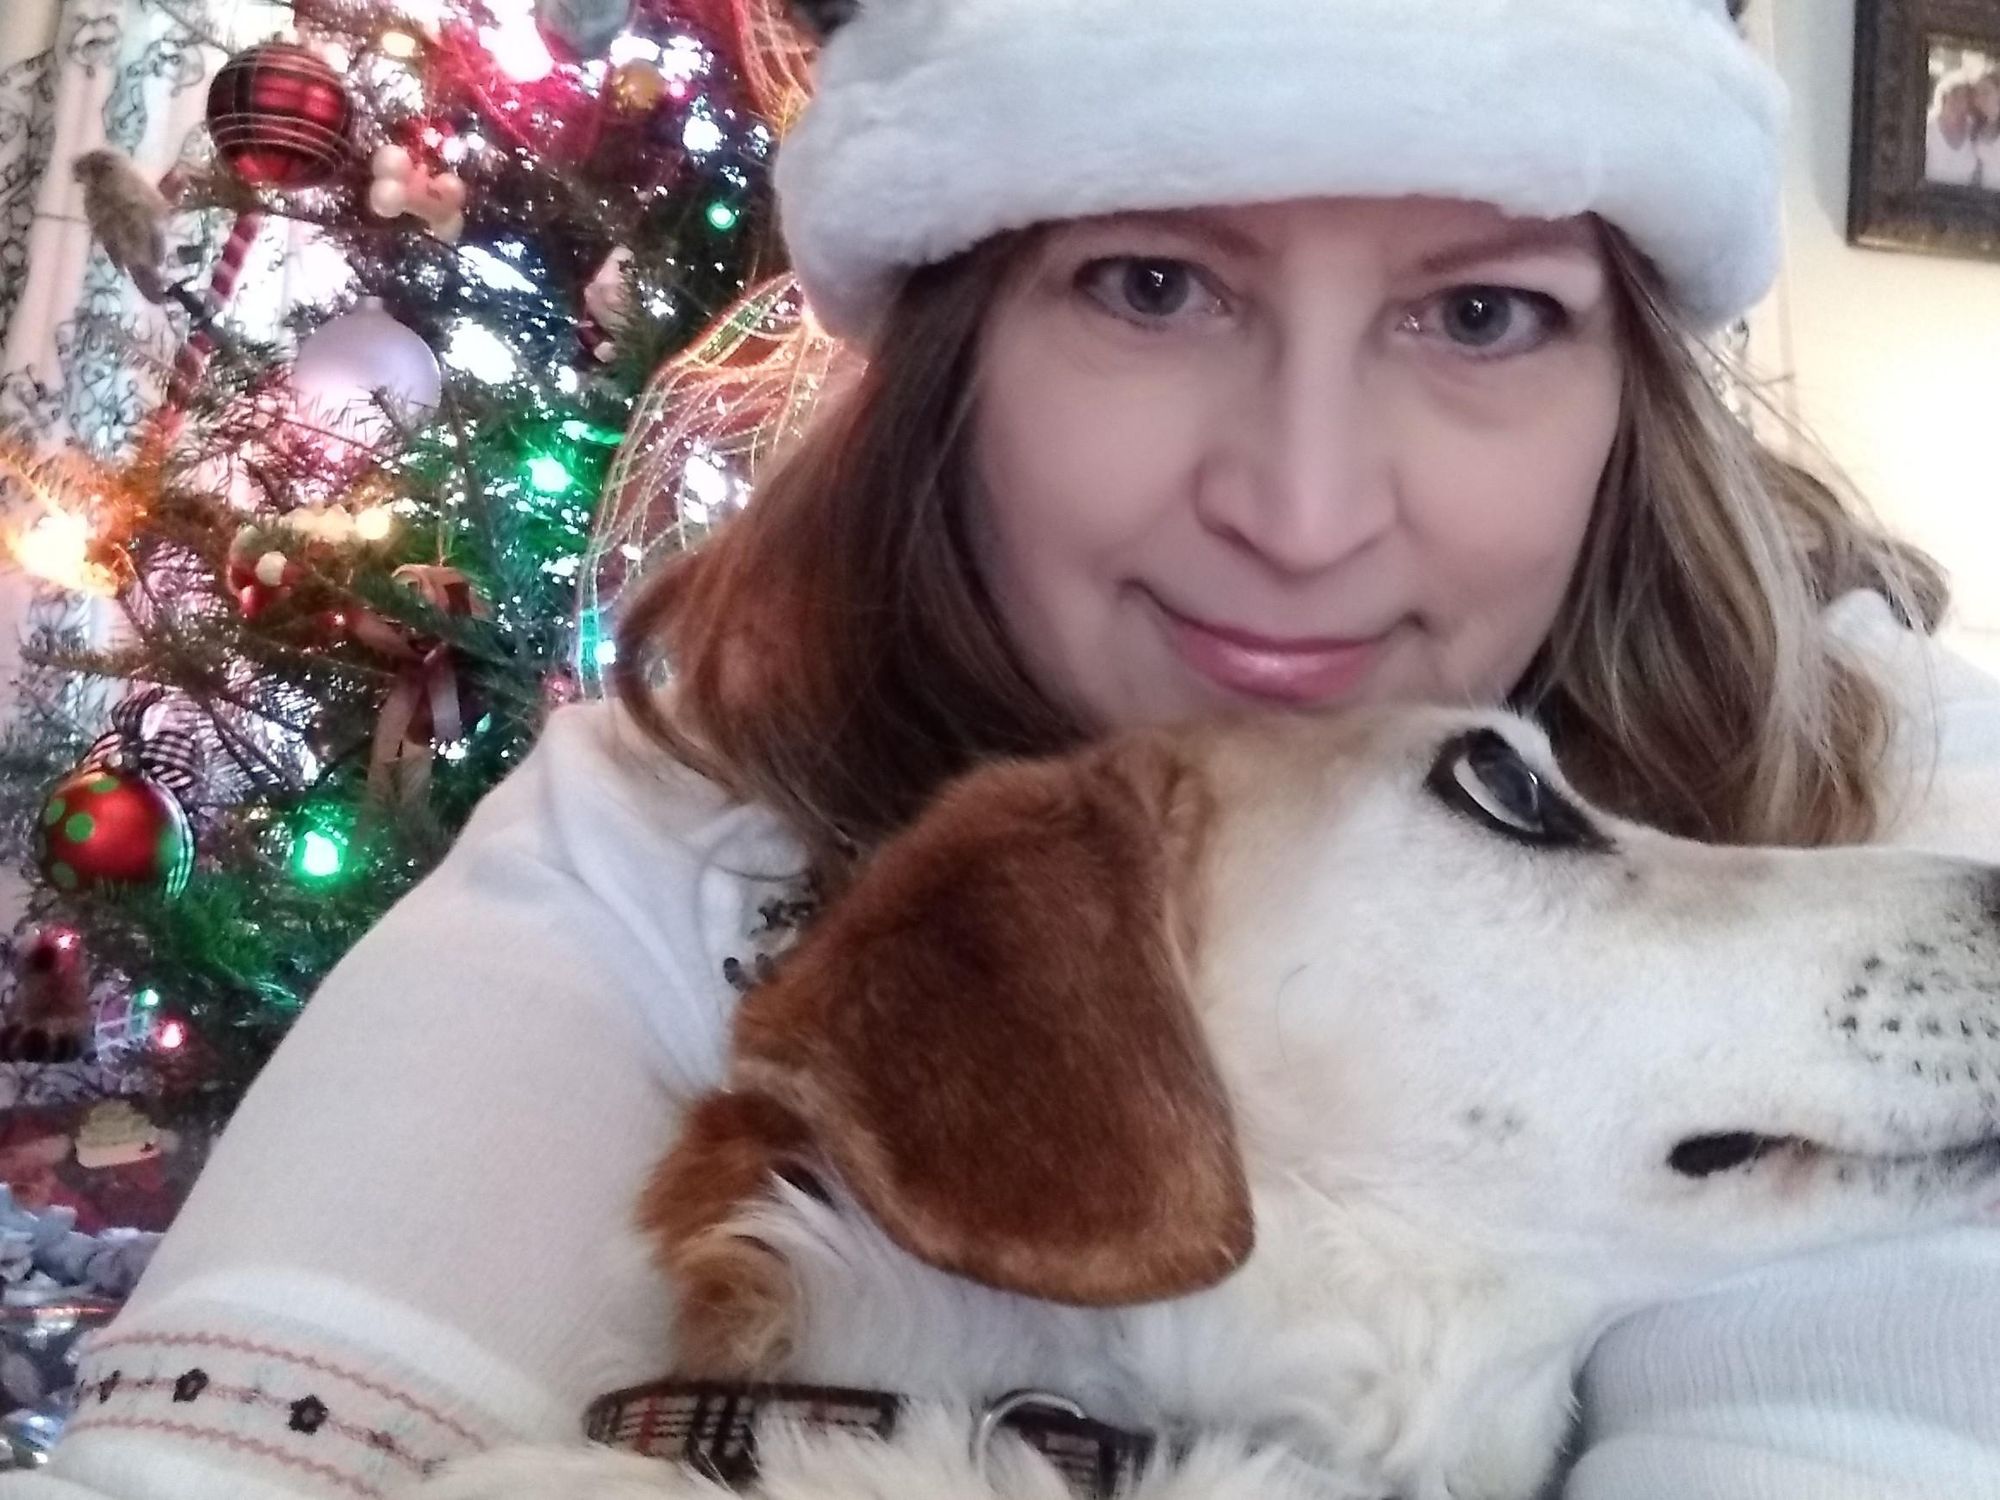 Puppies Deserve Better After Christmastime